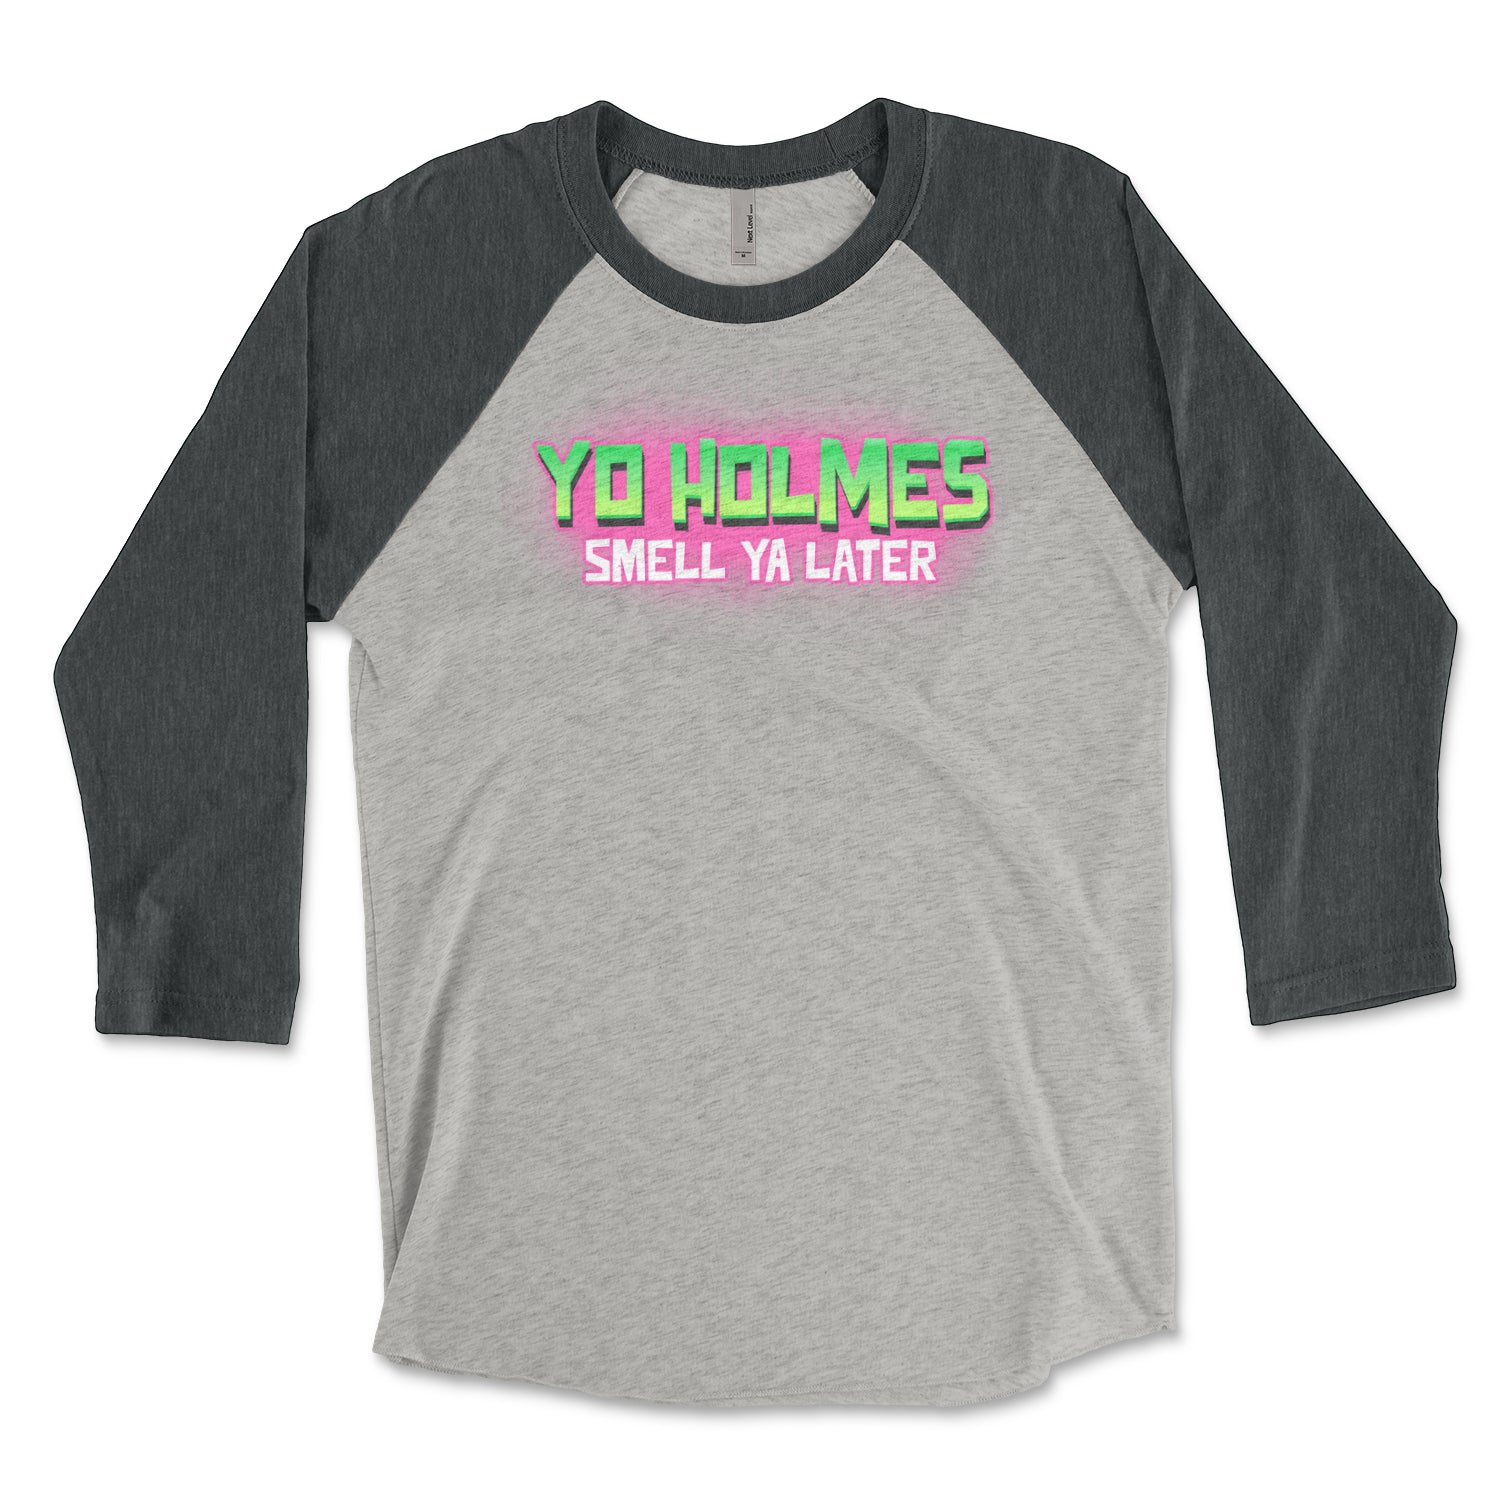 Fresh Prince of Bel-Air Yo Holmes, smell ya later premium heather grey and vintage black triblend raglan tee from Phillygoat